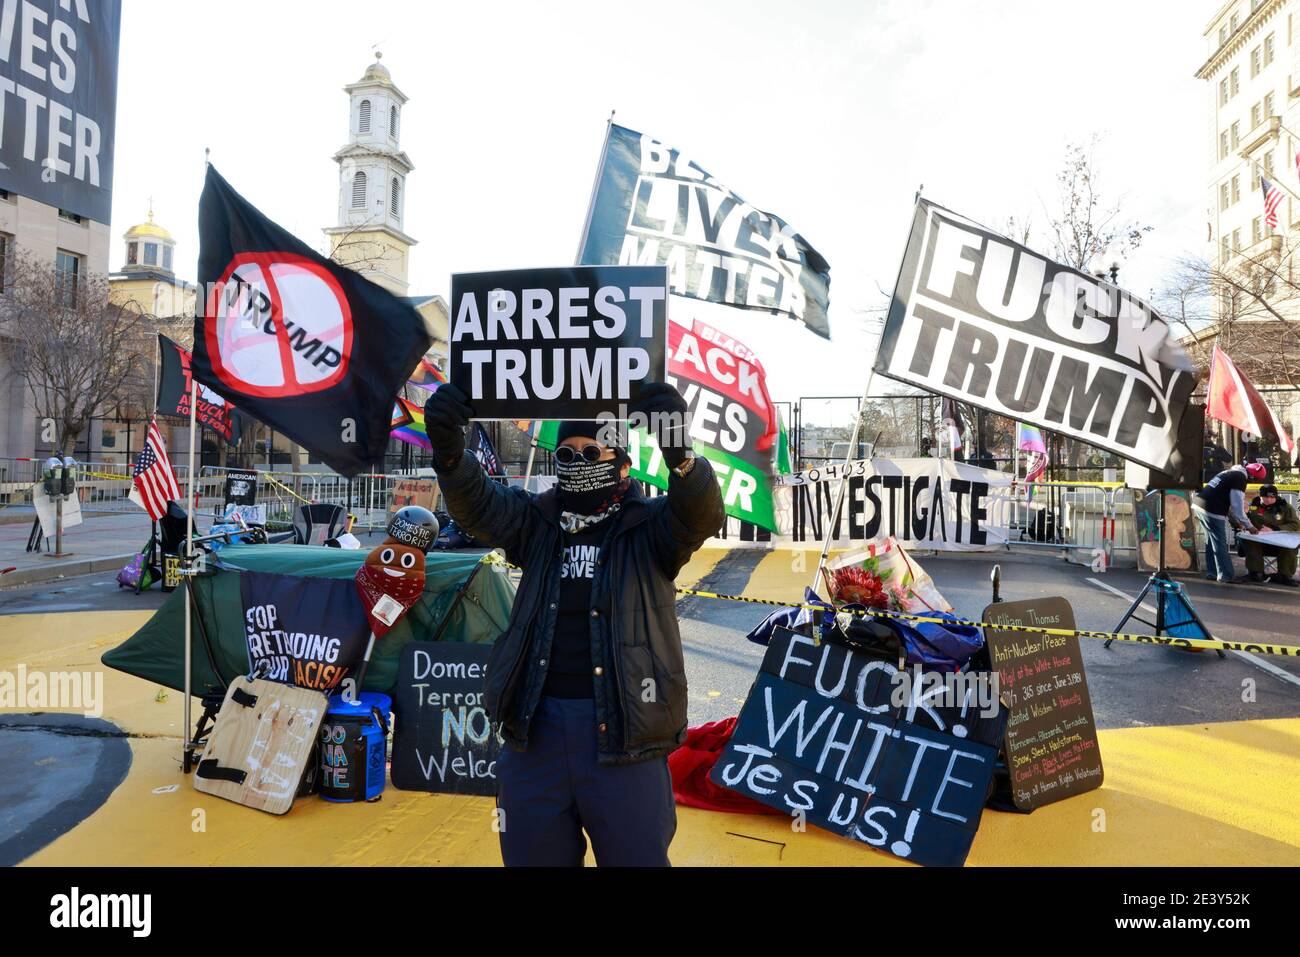 Washington, Columbia, USA. 20th Jan, 2020. Activist Laurie Arbeiter holds a sign reading ''Arrest Trump'' at Black Lives Matter Plaza after the departure of Donald J. Trump's helicopter at the white house on the inauguration day of President Joe Biden and Vice President Kamala Harris. Credit: Jeremy Hogan/SOPA Images/ZUMA Wire/Alamy Live News Stock Photo